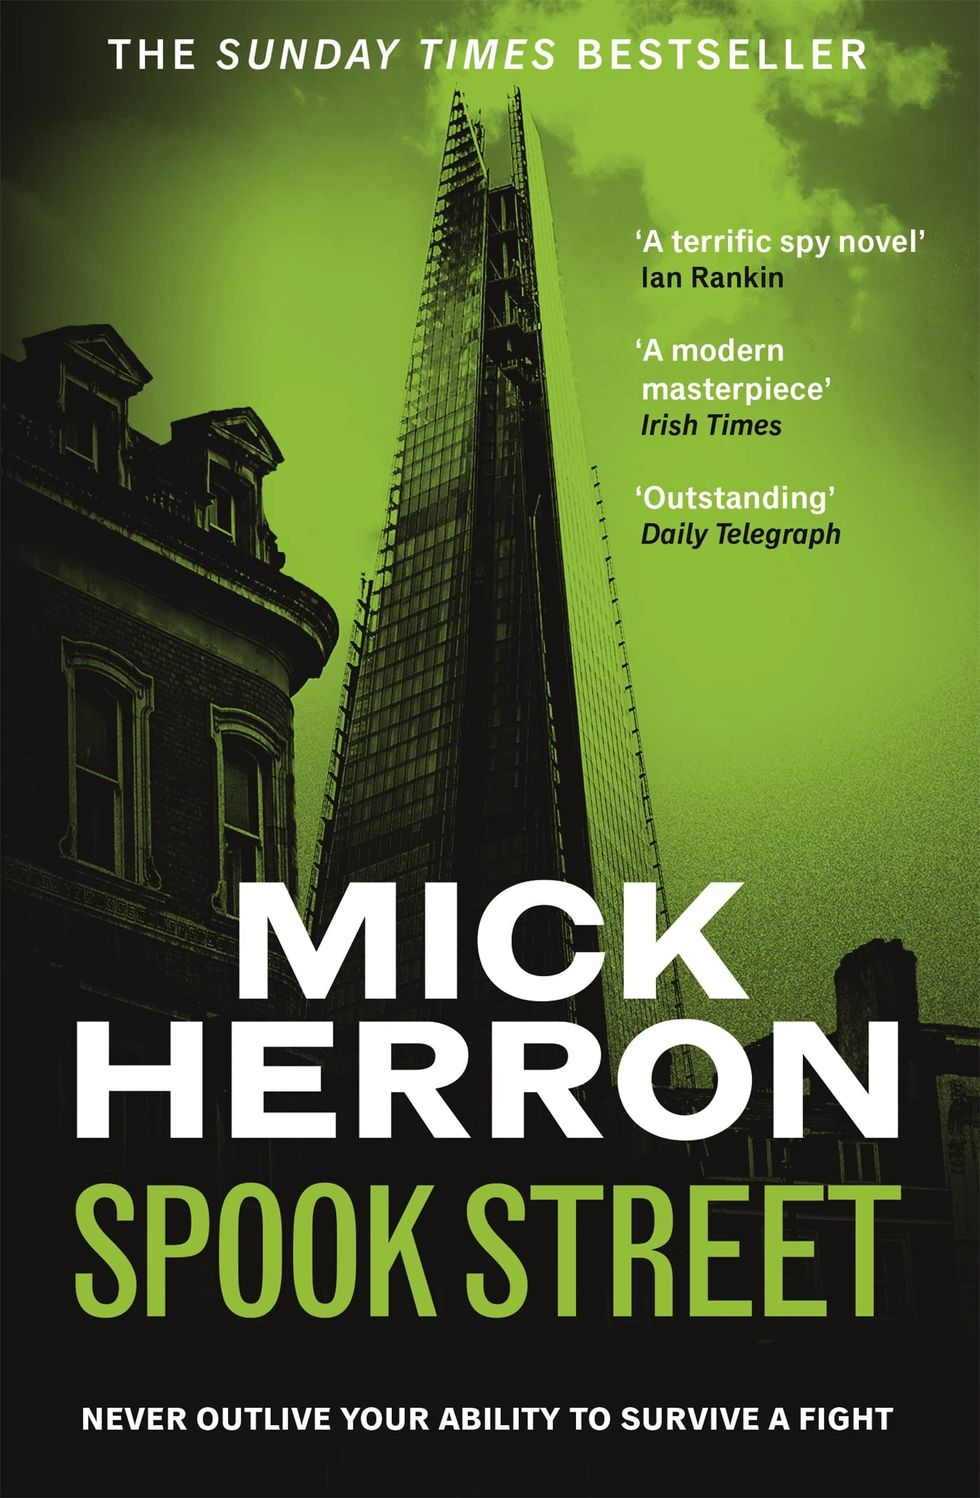 Spook Street by Mick Herron (Slough House book 4)